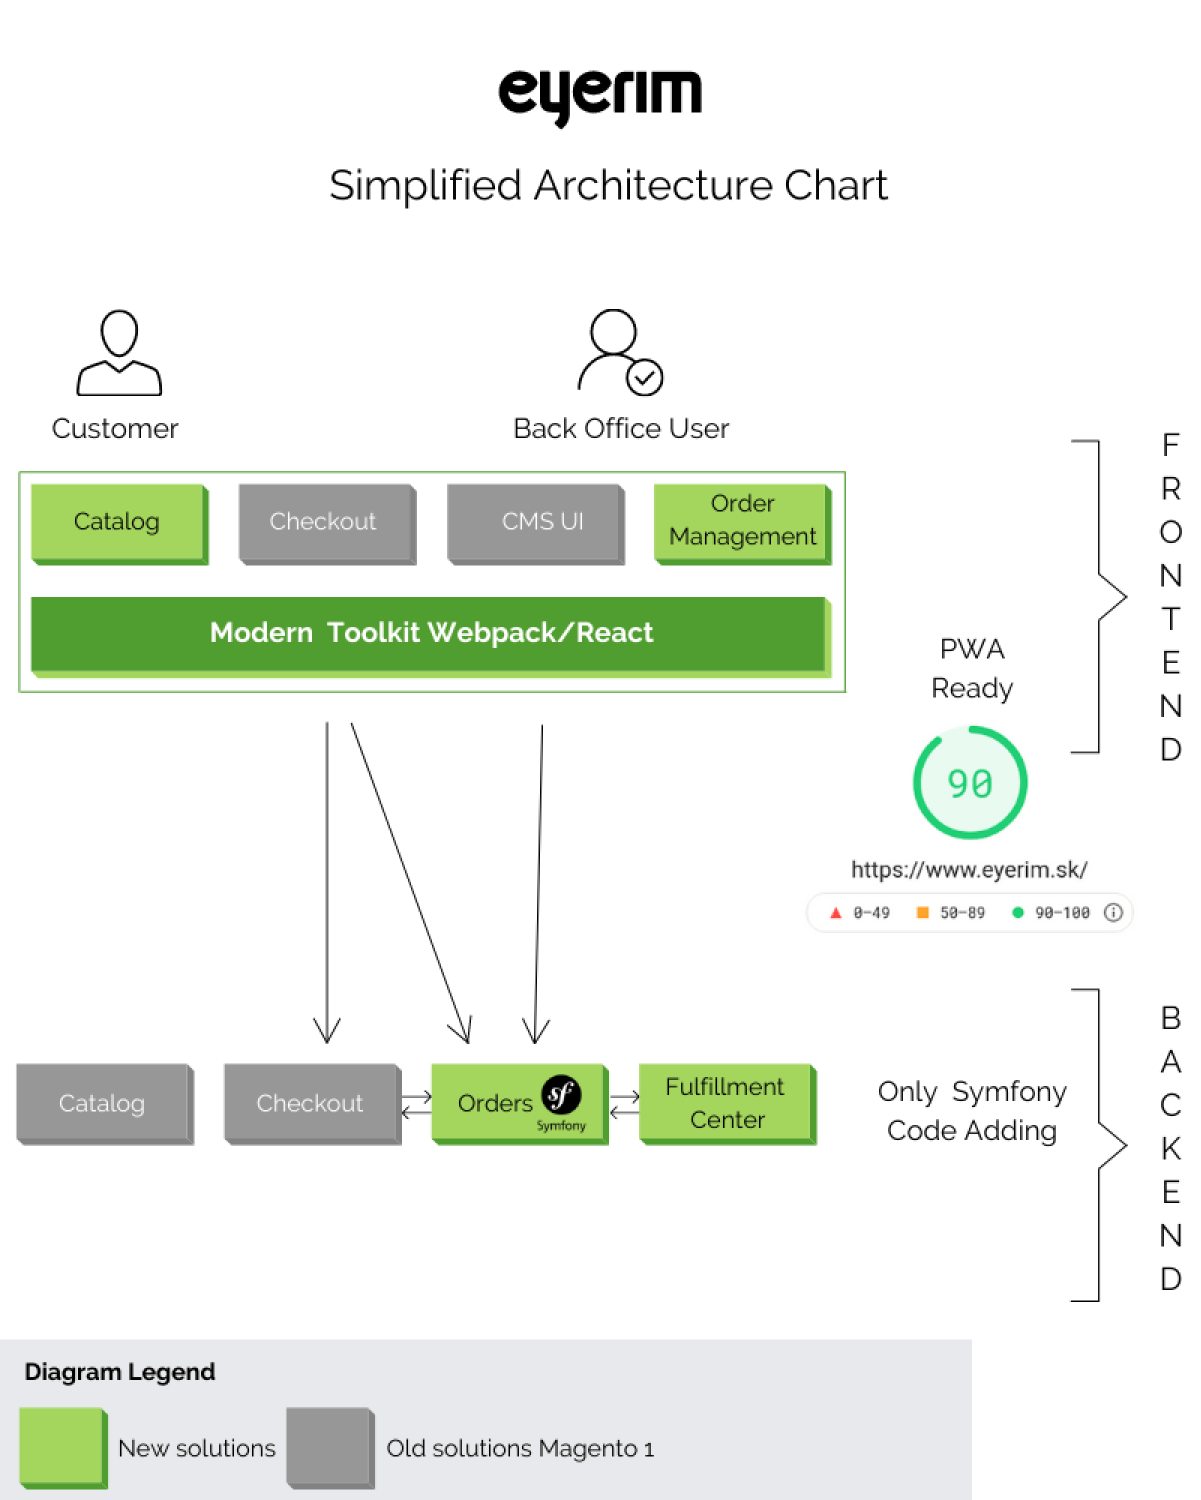 Simplified Architecture Chart